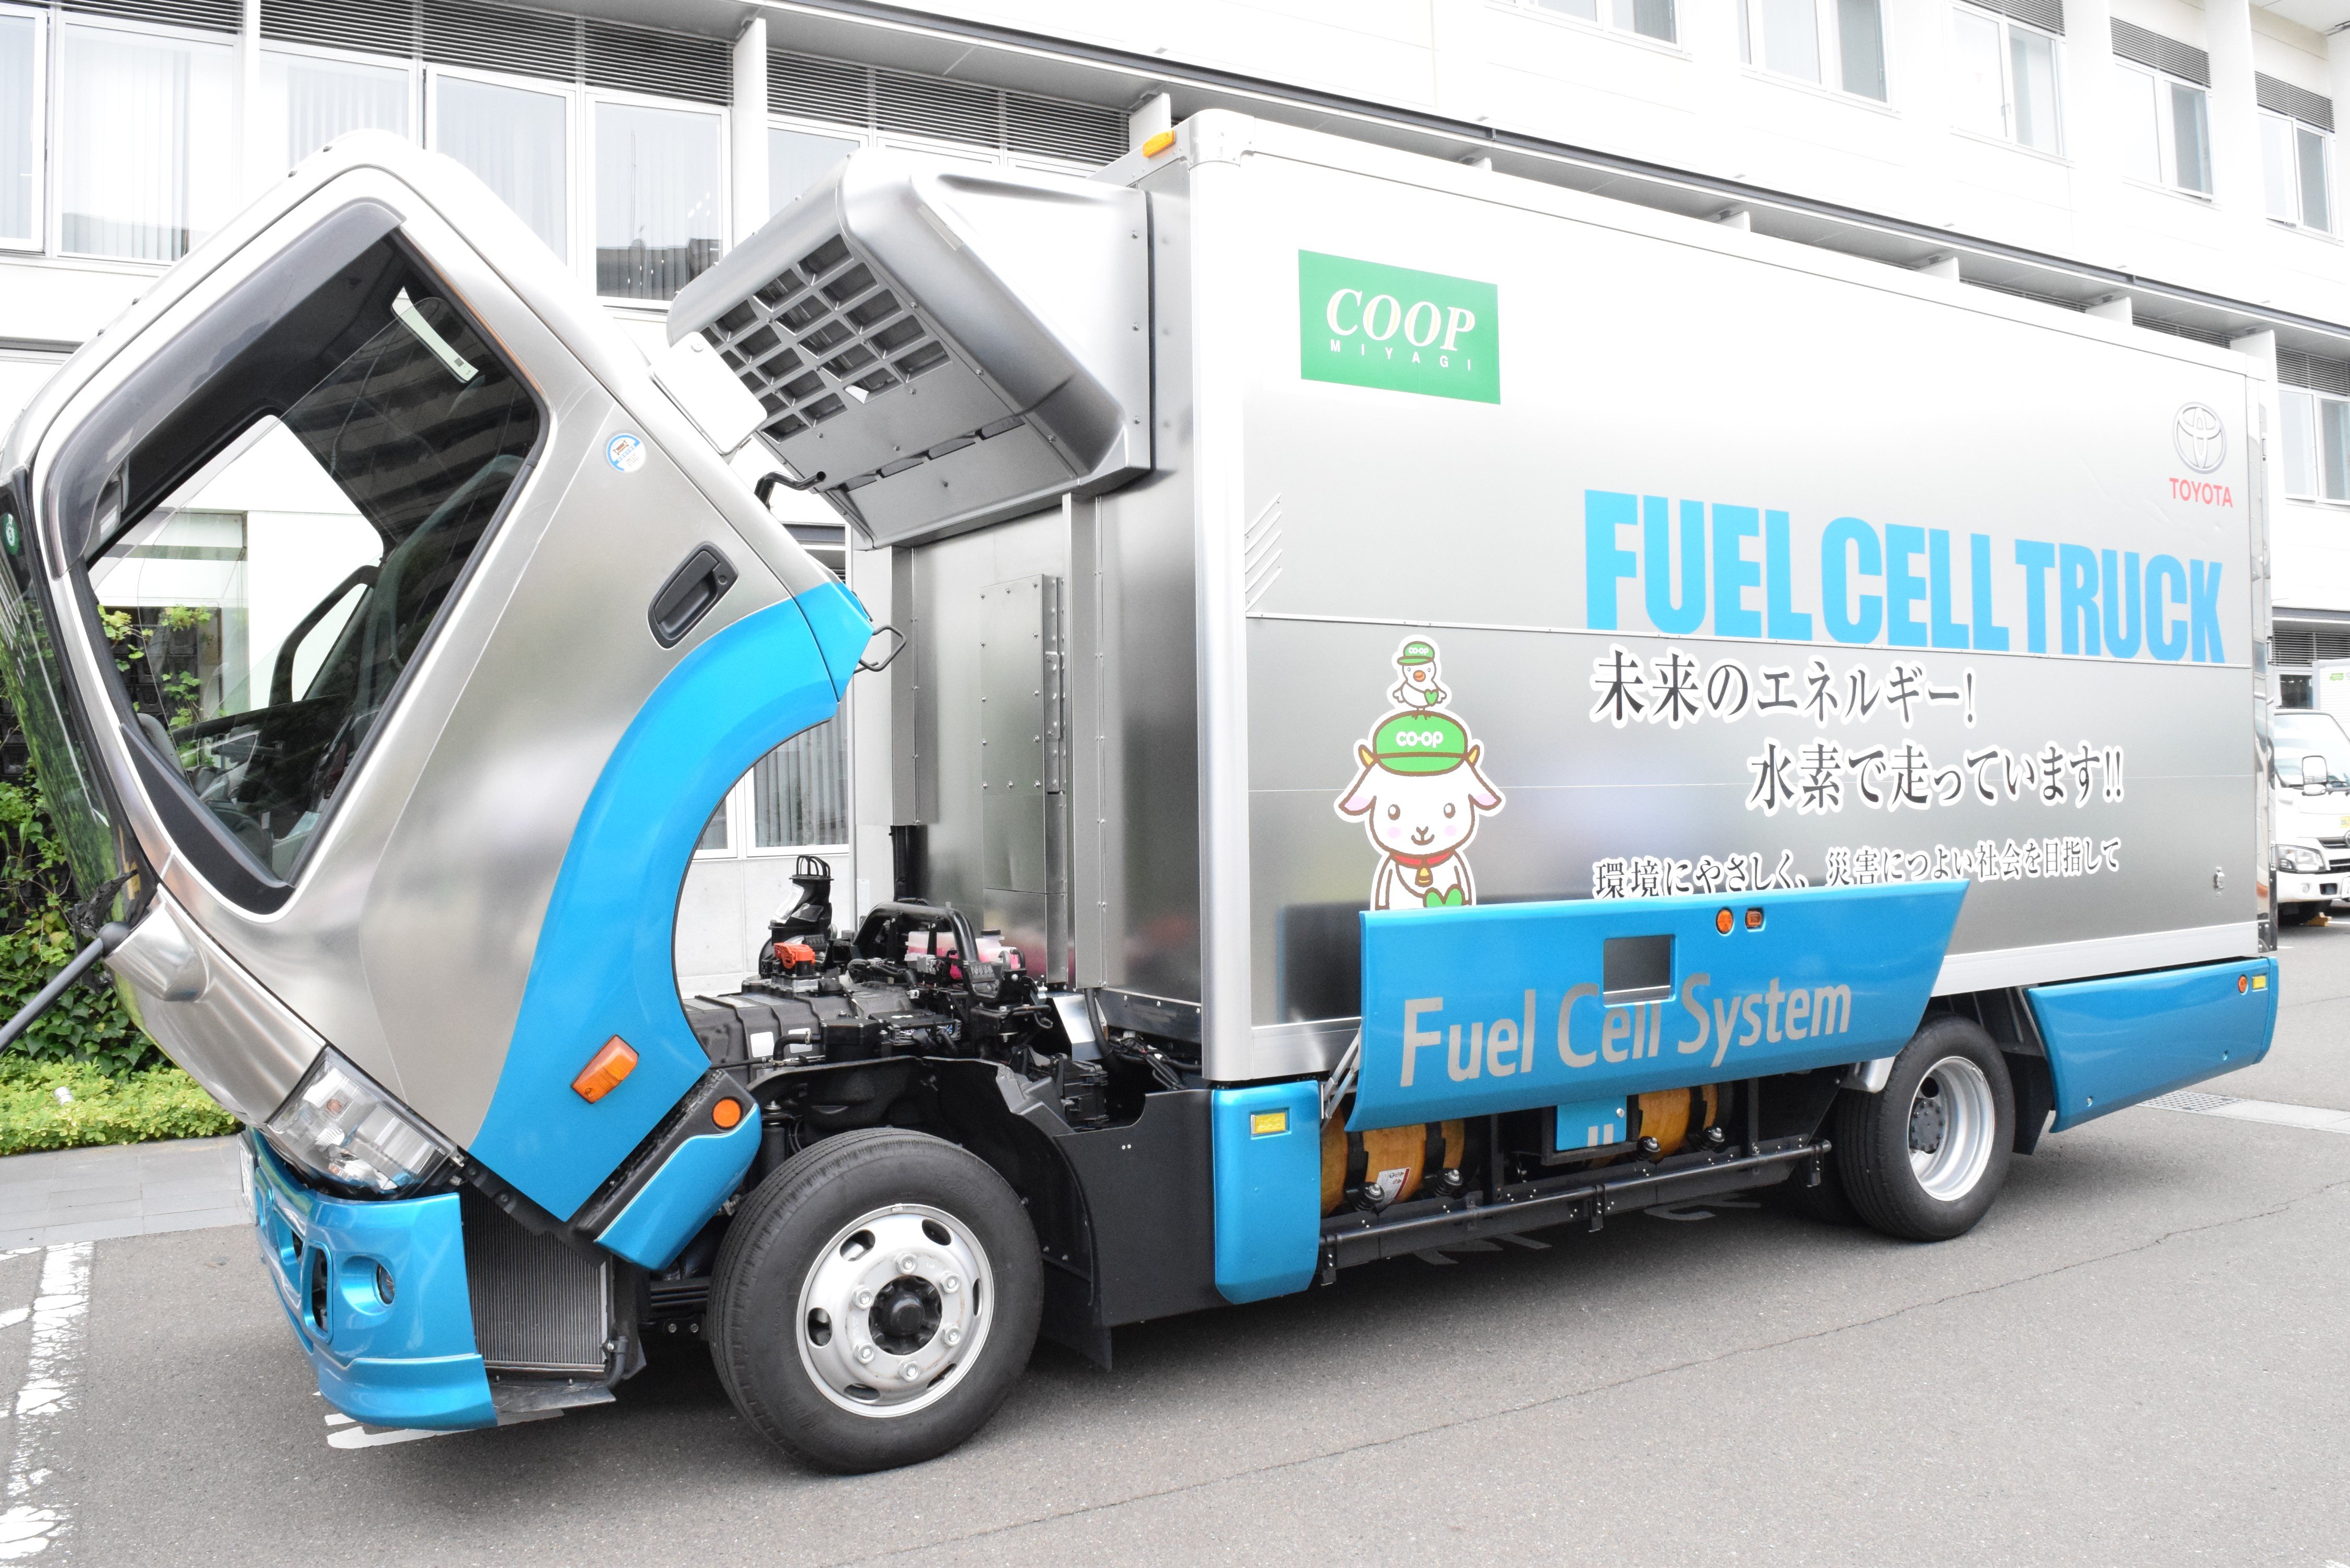 Miyagi Co-op starts survey to commercialize hydrogen energy supply chain